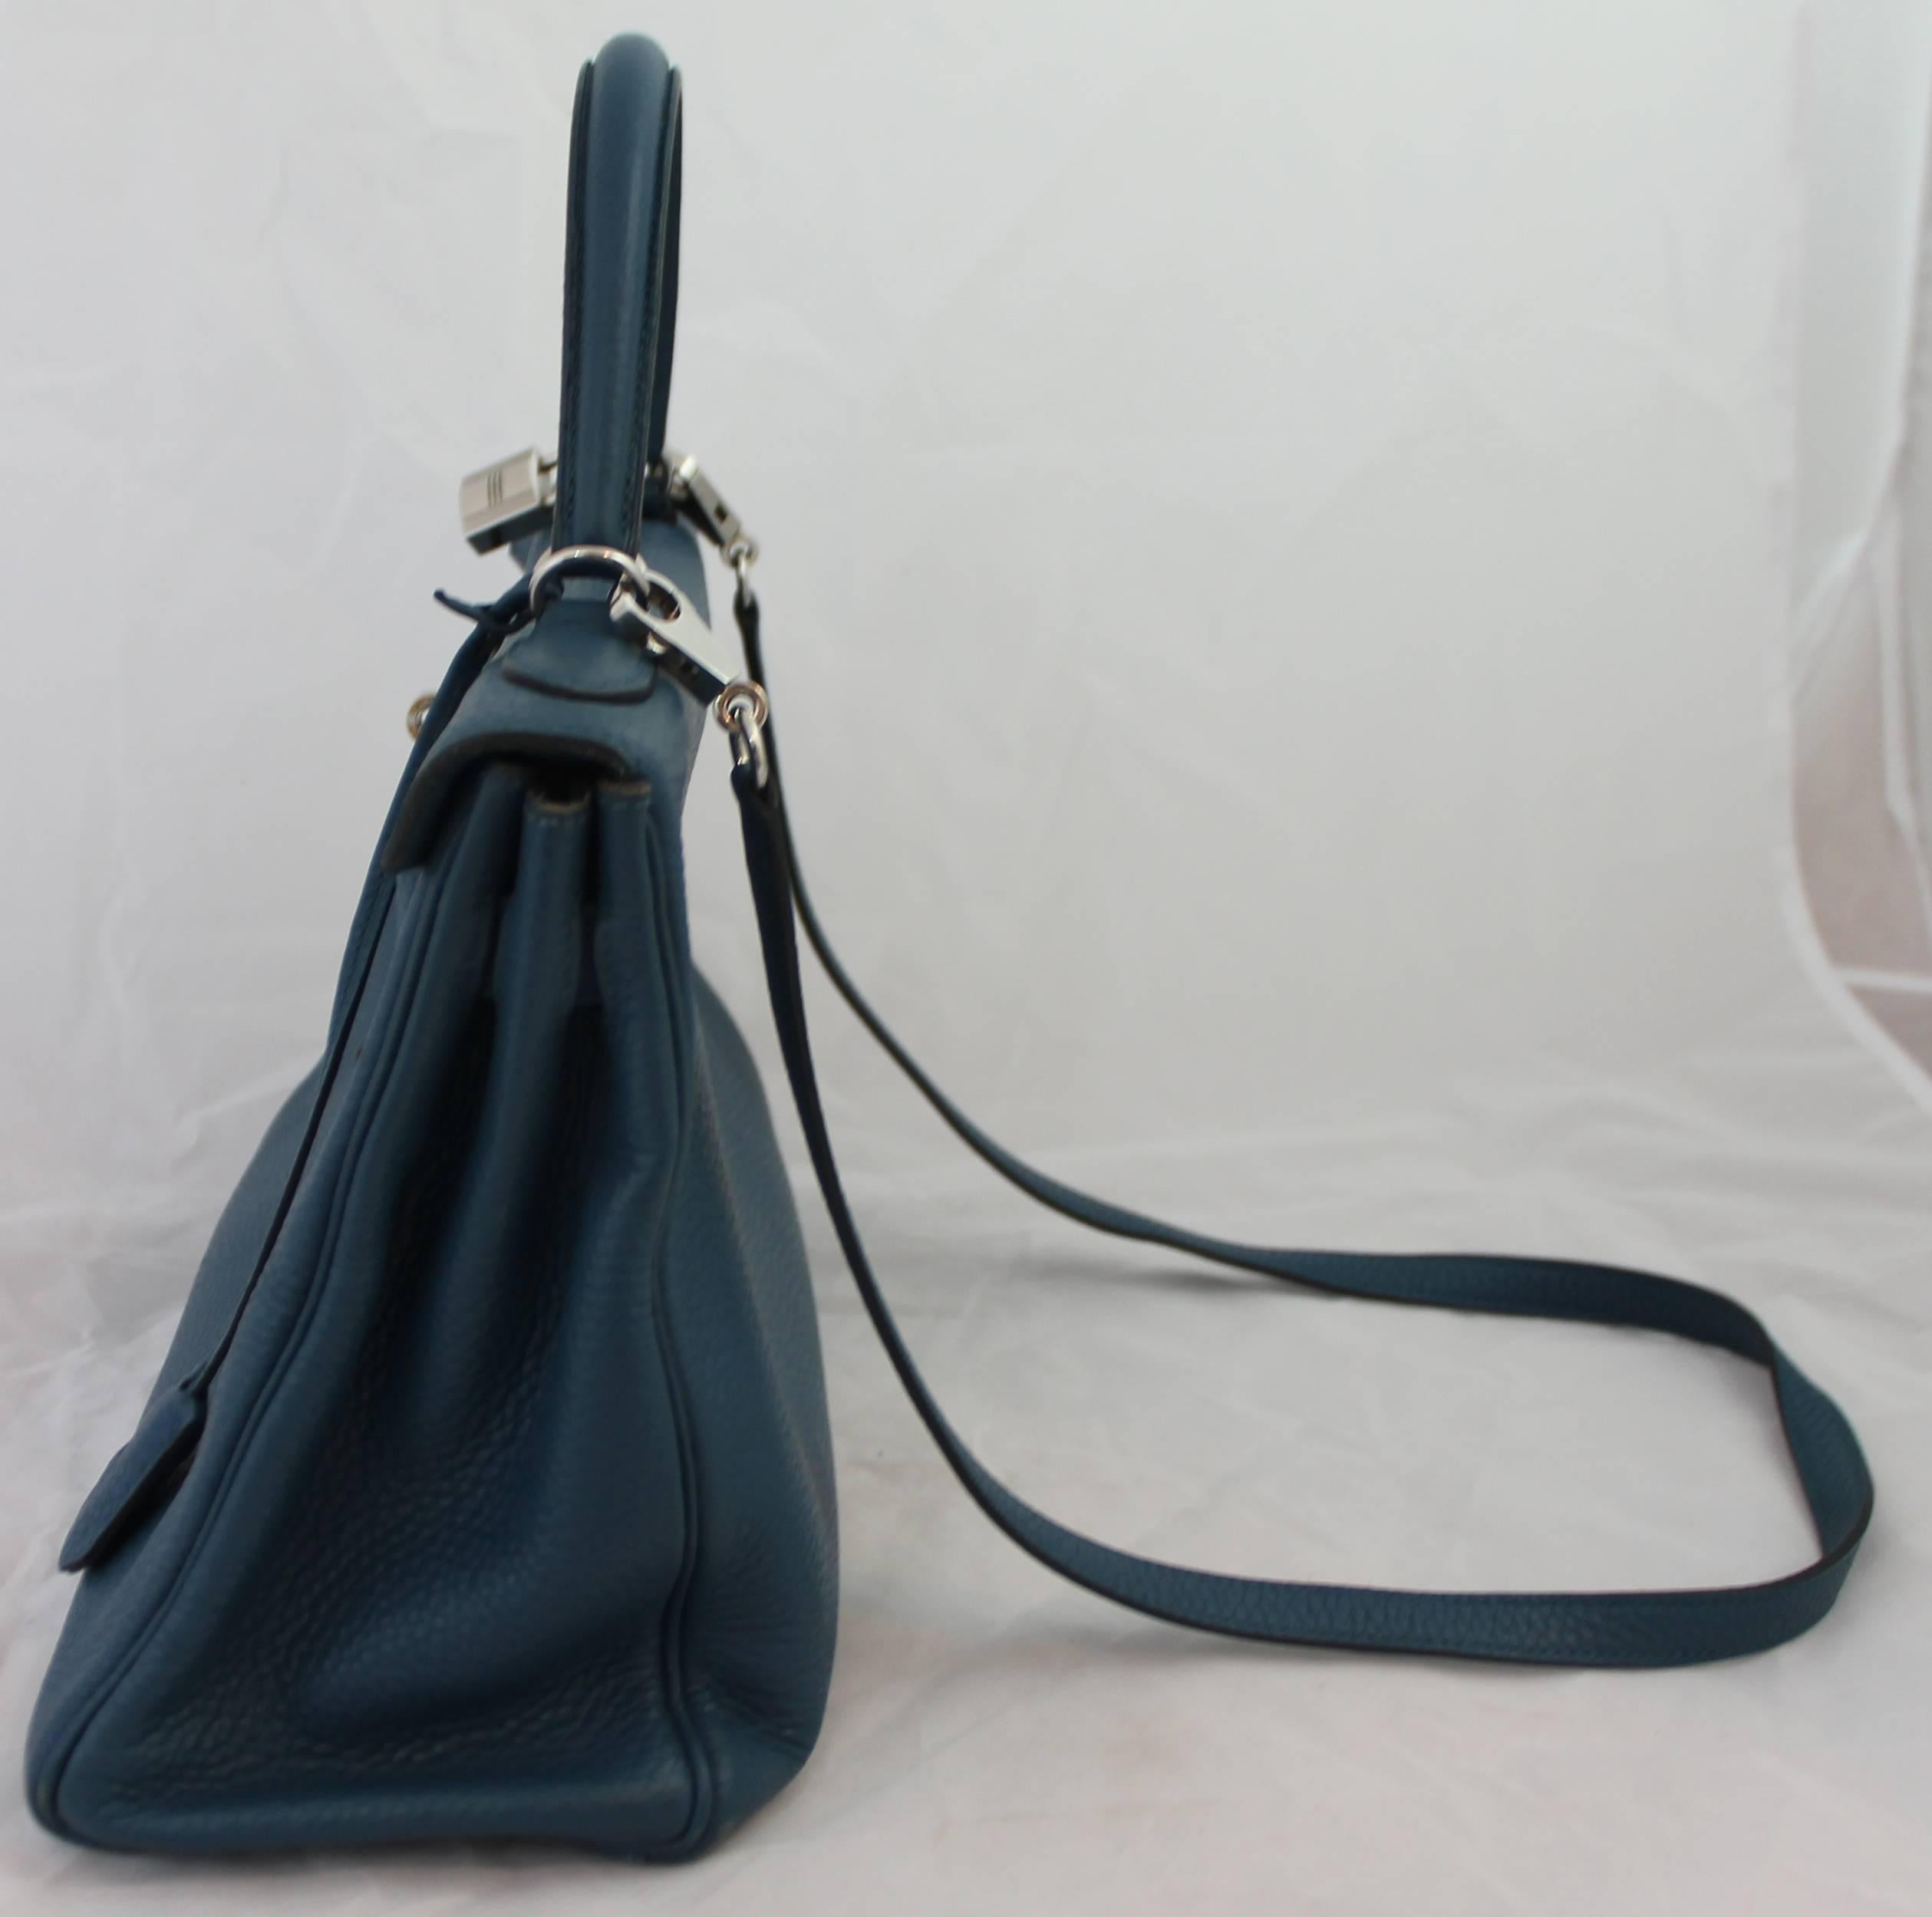 Hermes Blue Thalassa Togo 32cm Retourne Kelly Handbag - PHW- 2013 This beautiful Kelly Handbag is in the soft togo called the retourne style. The bag is in very good condition with the exception of some wear on the bottom corners of the bag, visible